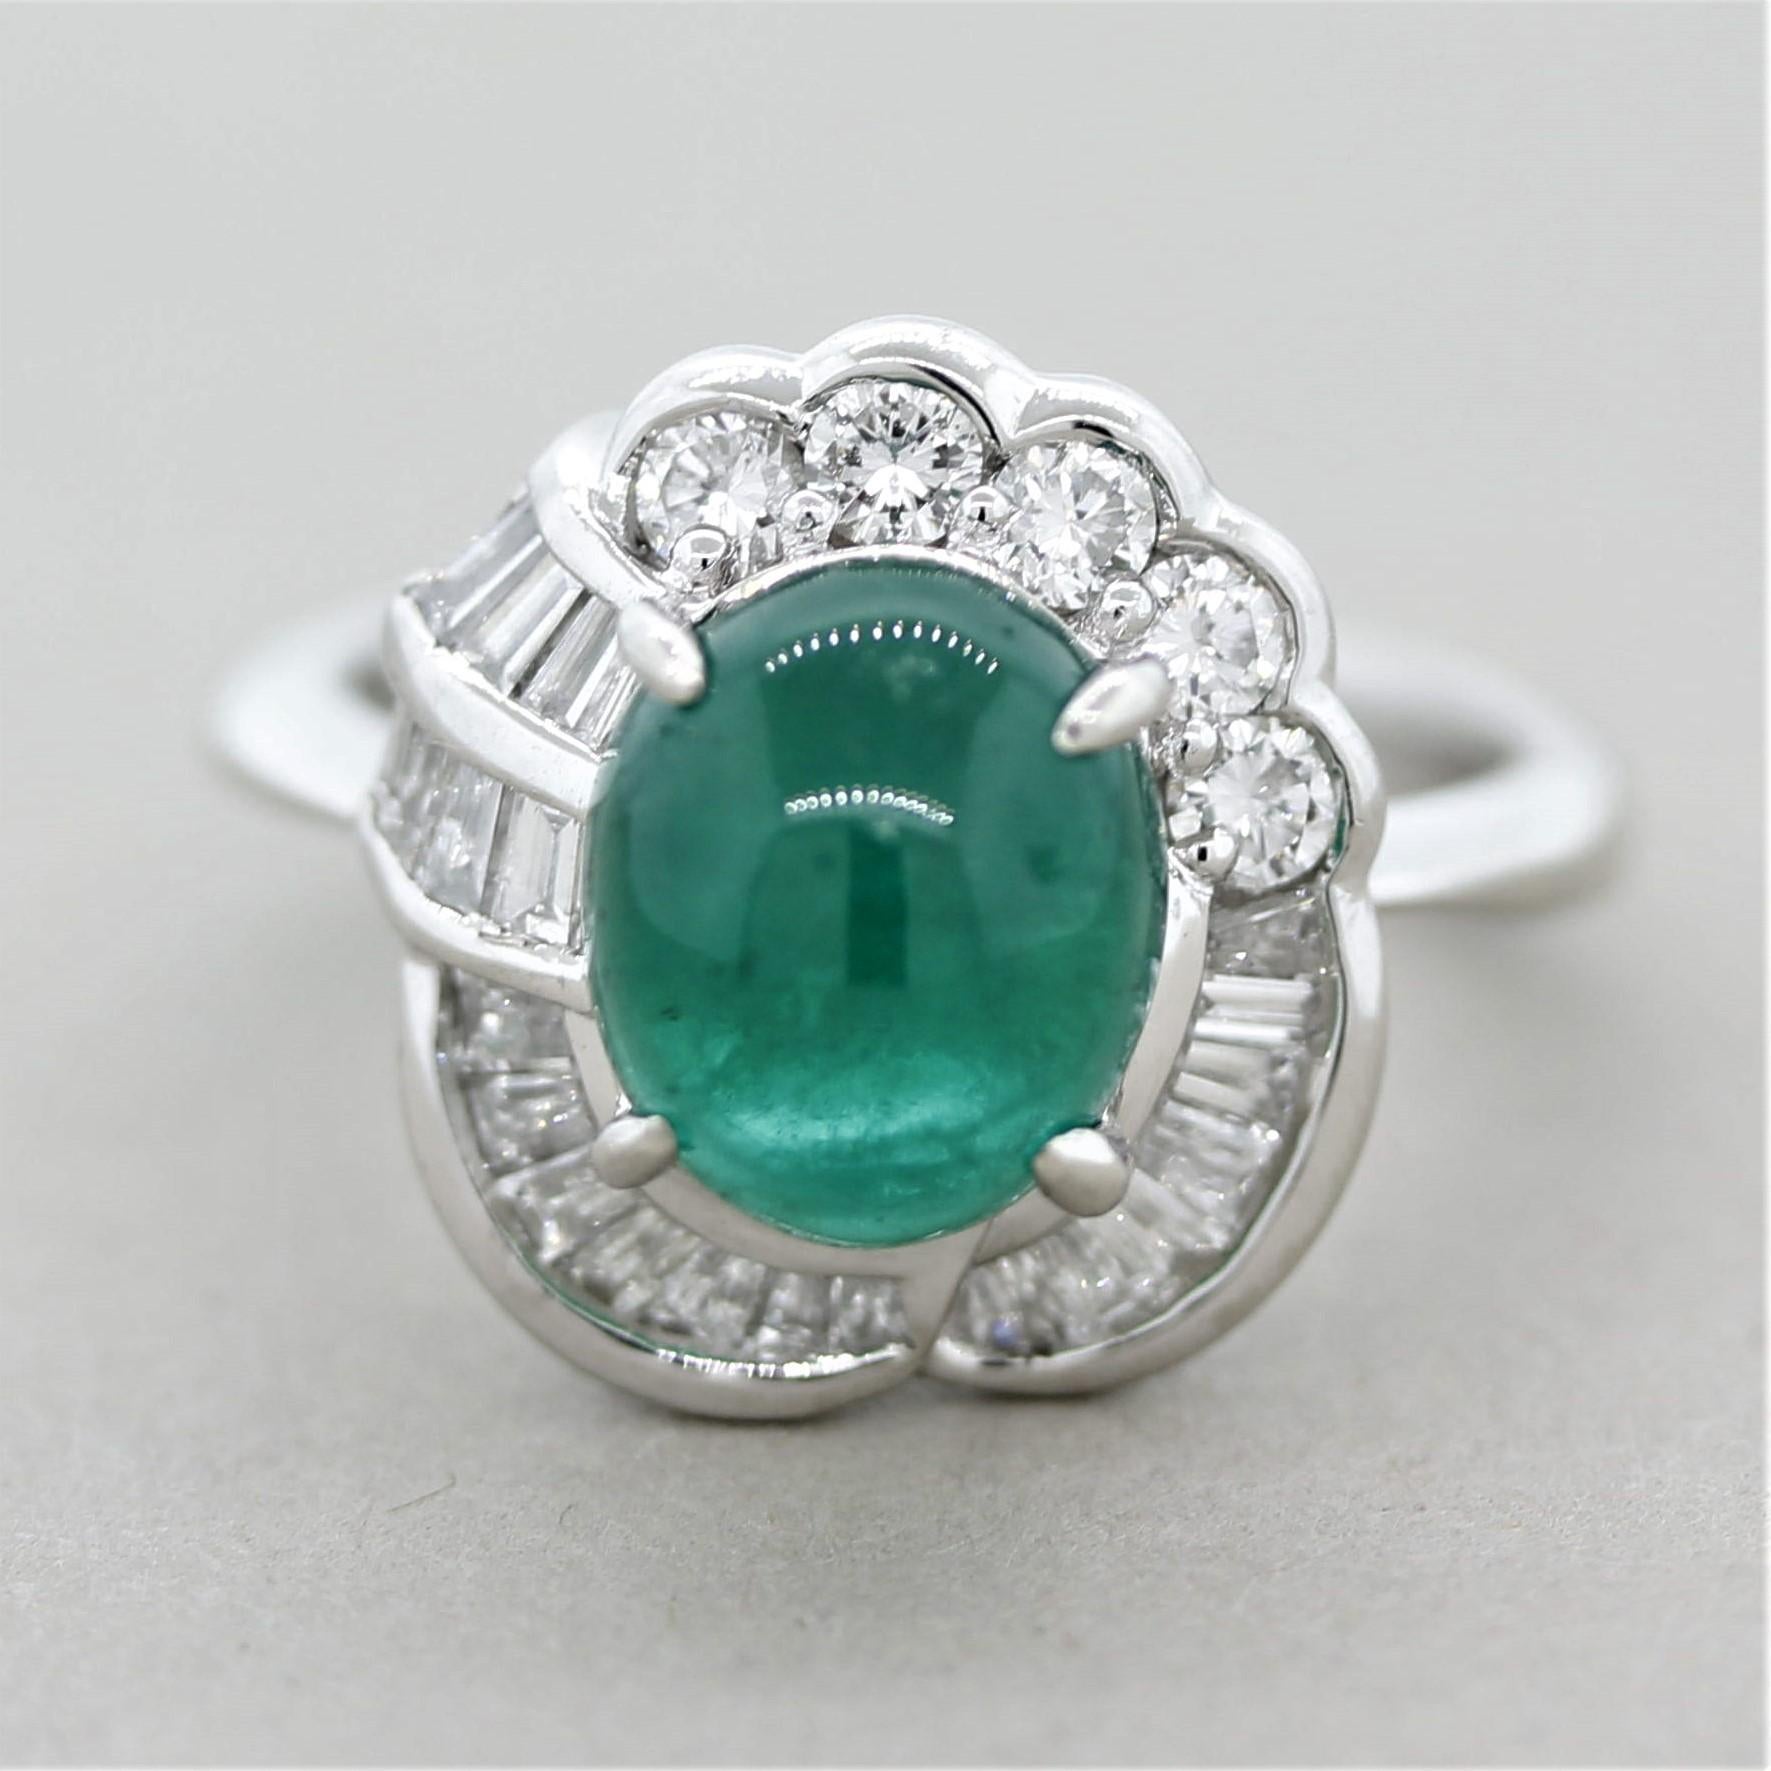 A beautifully made ring with a stunning emerald! The emerald weighs 3.25 carats and has an intense vivid green color. Adding to that, the cabochon-shape makes the stone appear to glow making it so pleasing to look at. The emerald is accented by 0.83